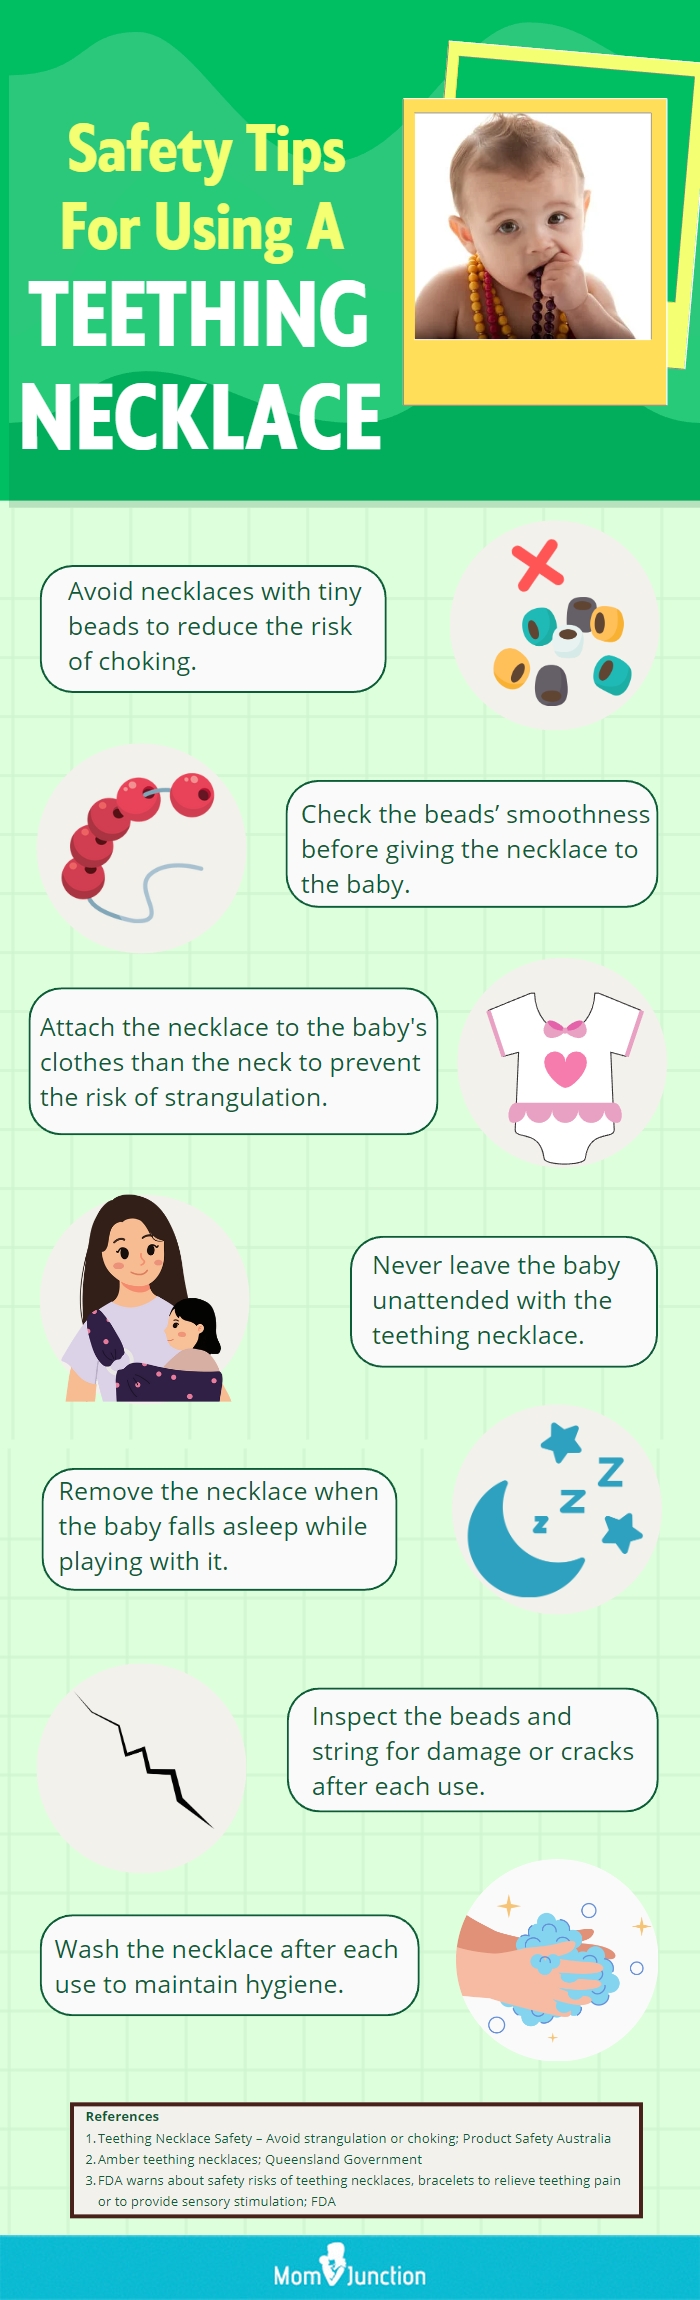 Safety Tips For Using A Teething Necklace (infographic)